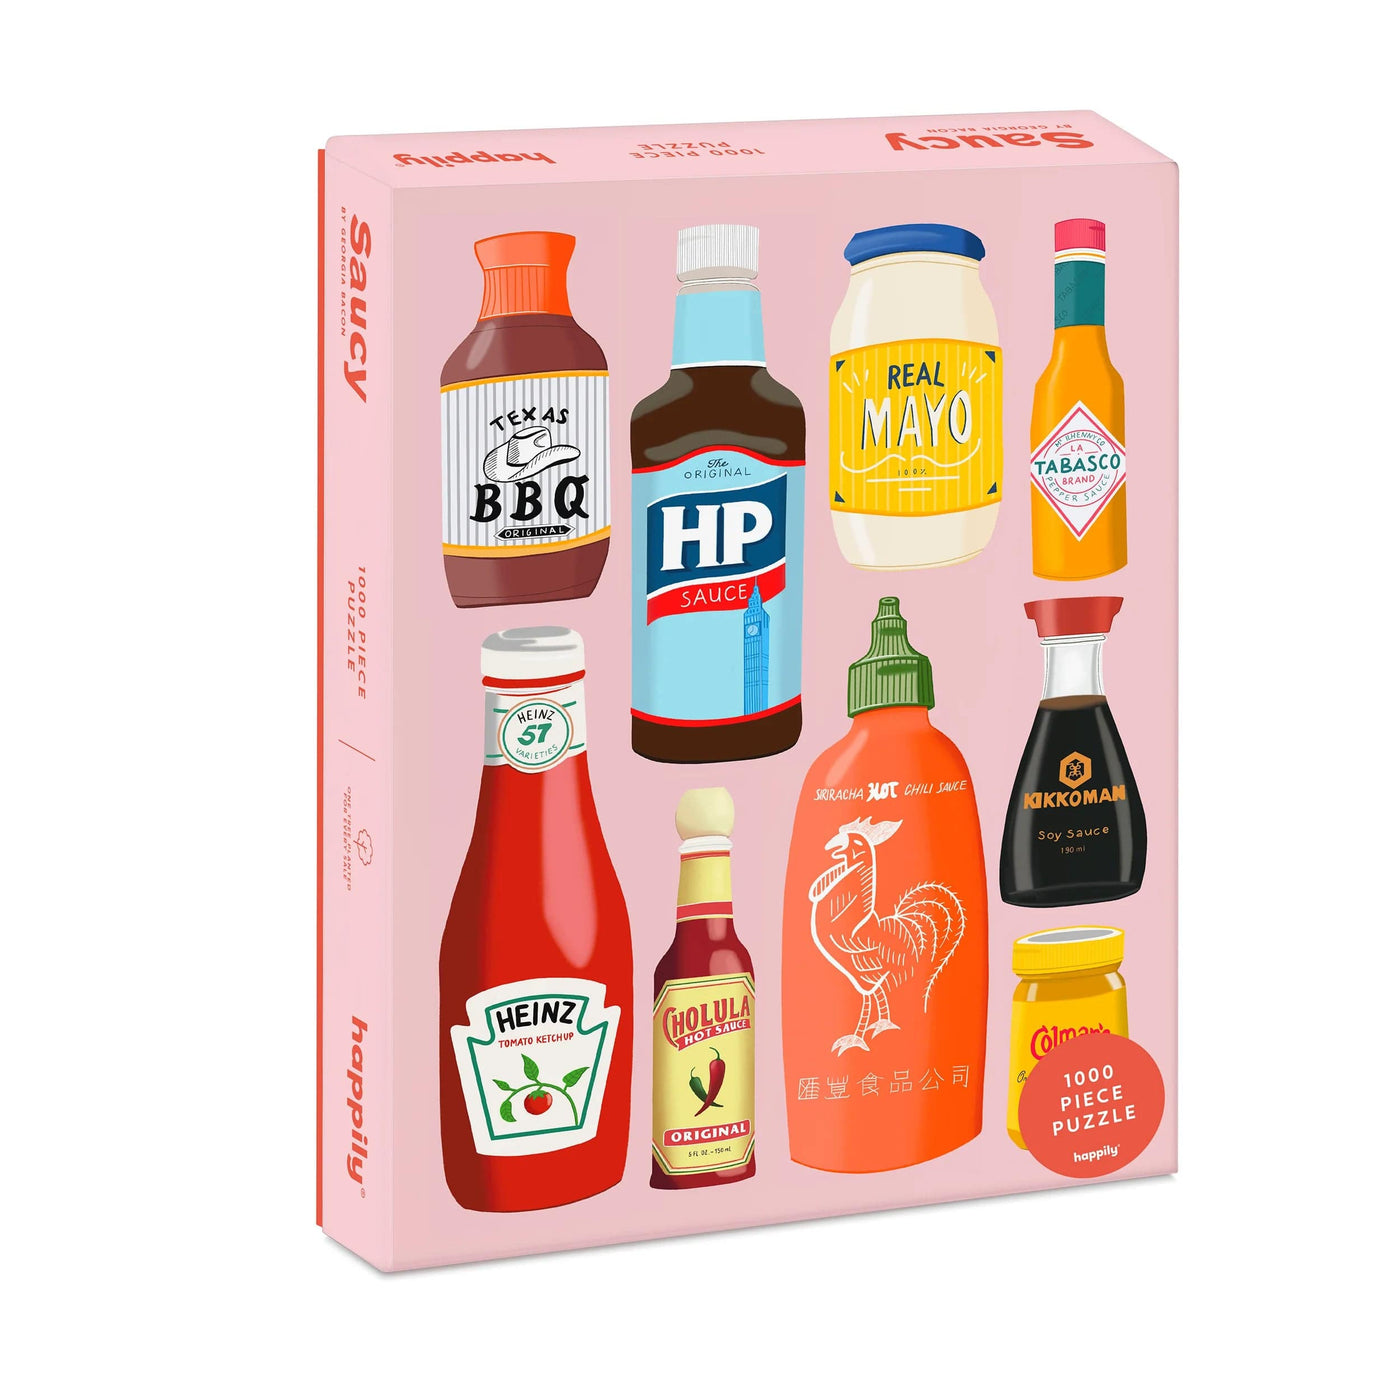 Happily Novelty Gifts Sauce Bottle Design 1000 Piece Jigsaw Puzzle